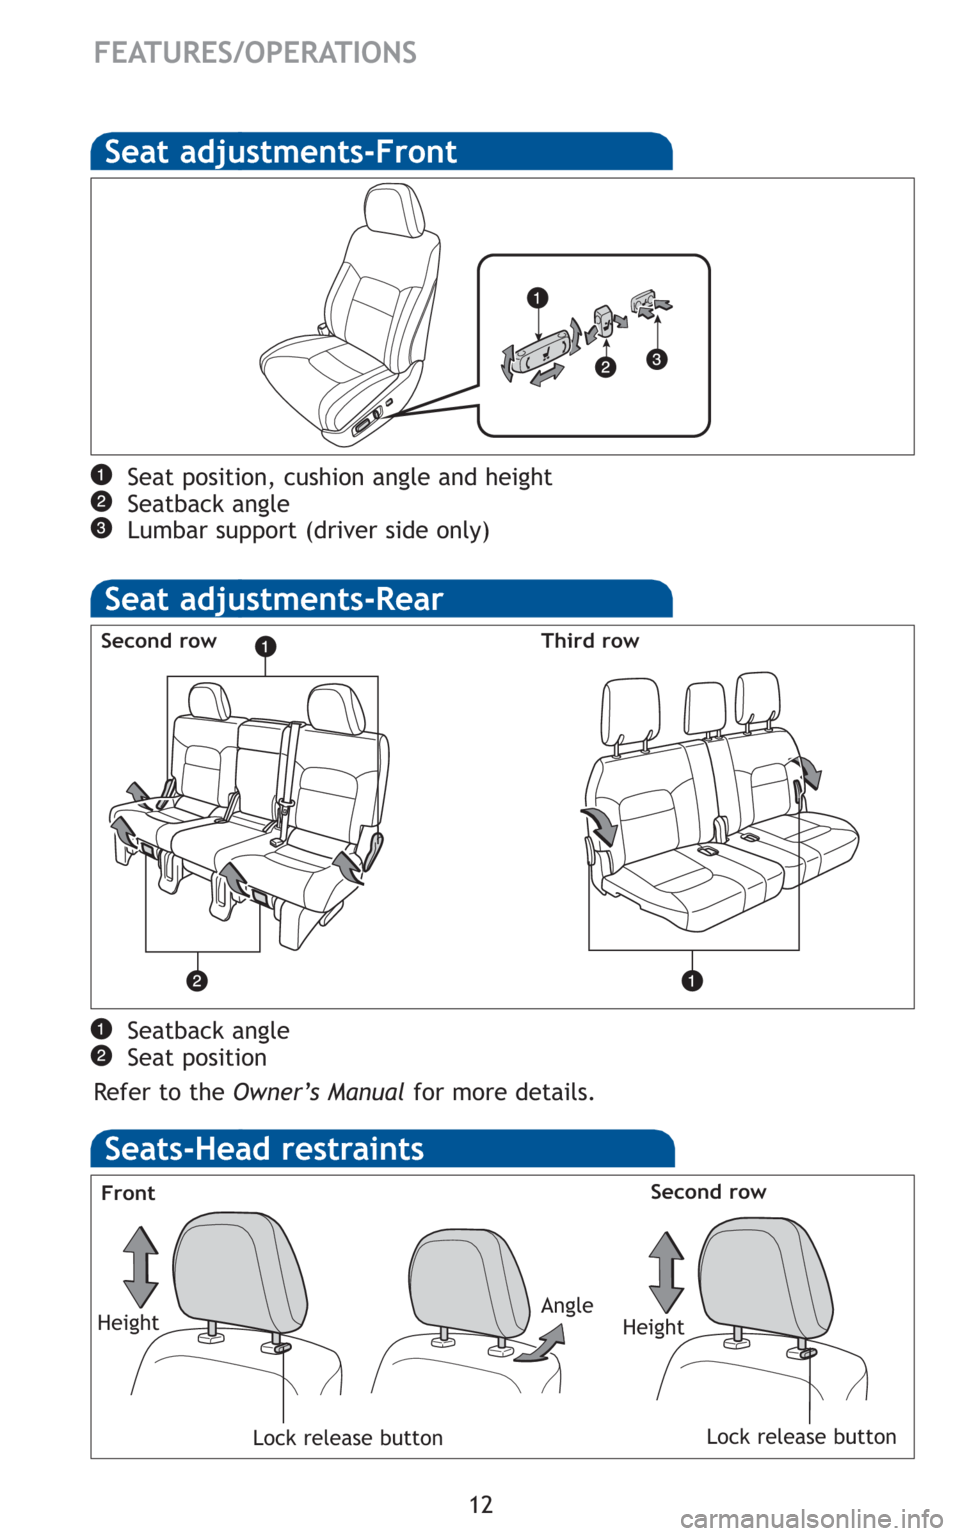 TOYOTA LAND CRUISER 2011 J200 Quick Reference Guide 12
FEATURES/OPERATIONS
Seat adjustments-Rear
Seatback angle
Seat position
Refer to the Owner’s Manualfor more details.
Seat adjustments-Front
Seat position, cushion angle and height
Seatback angle
L